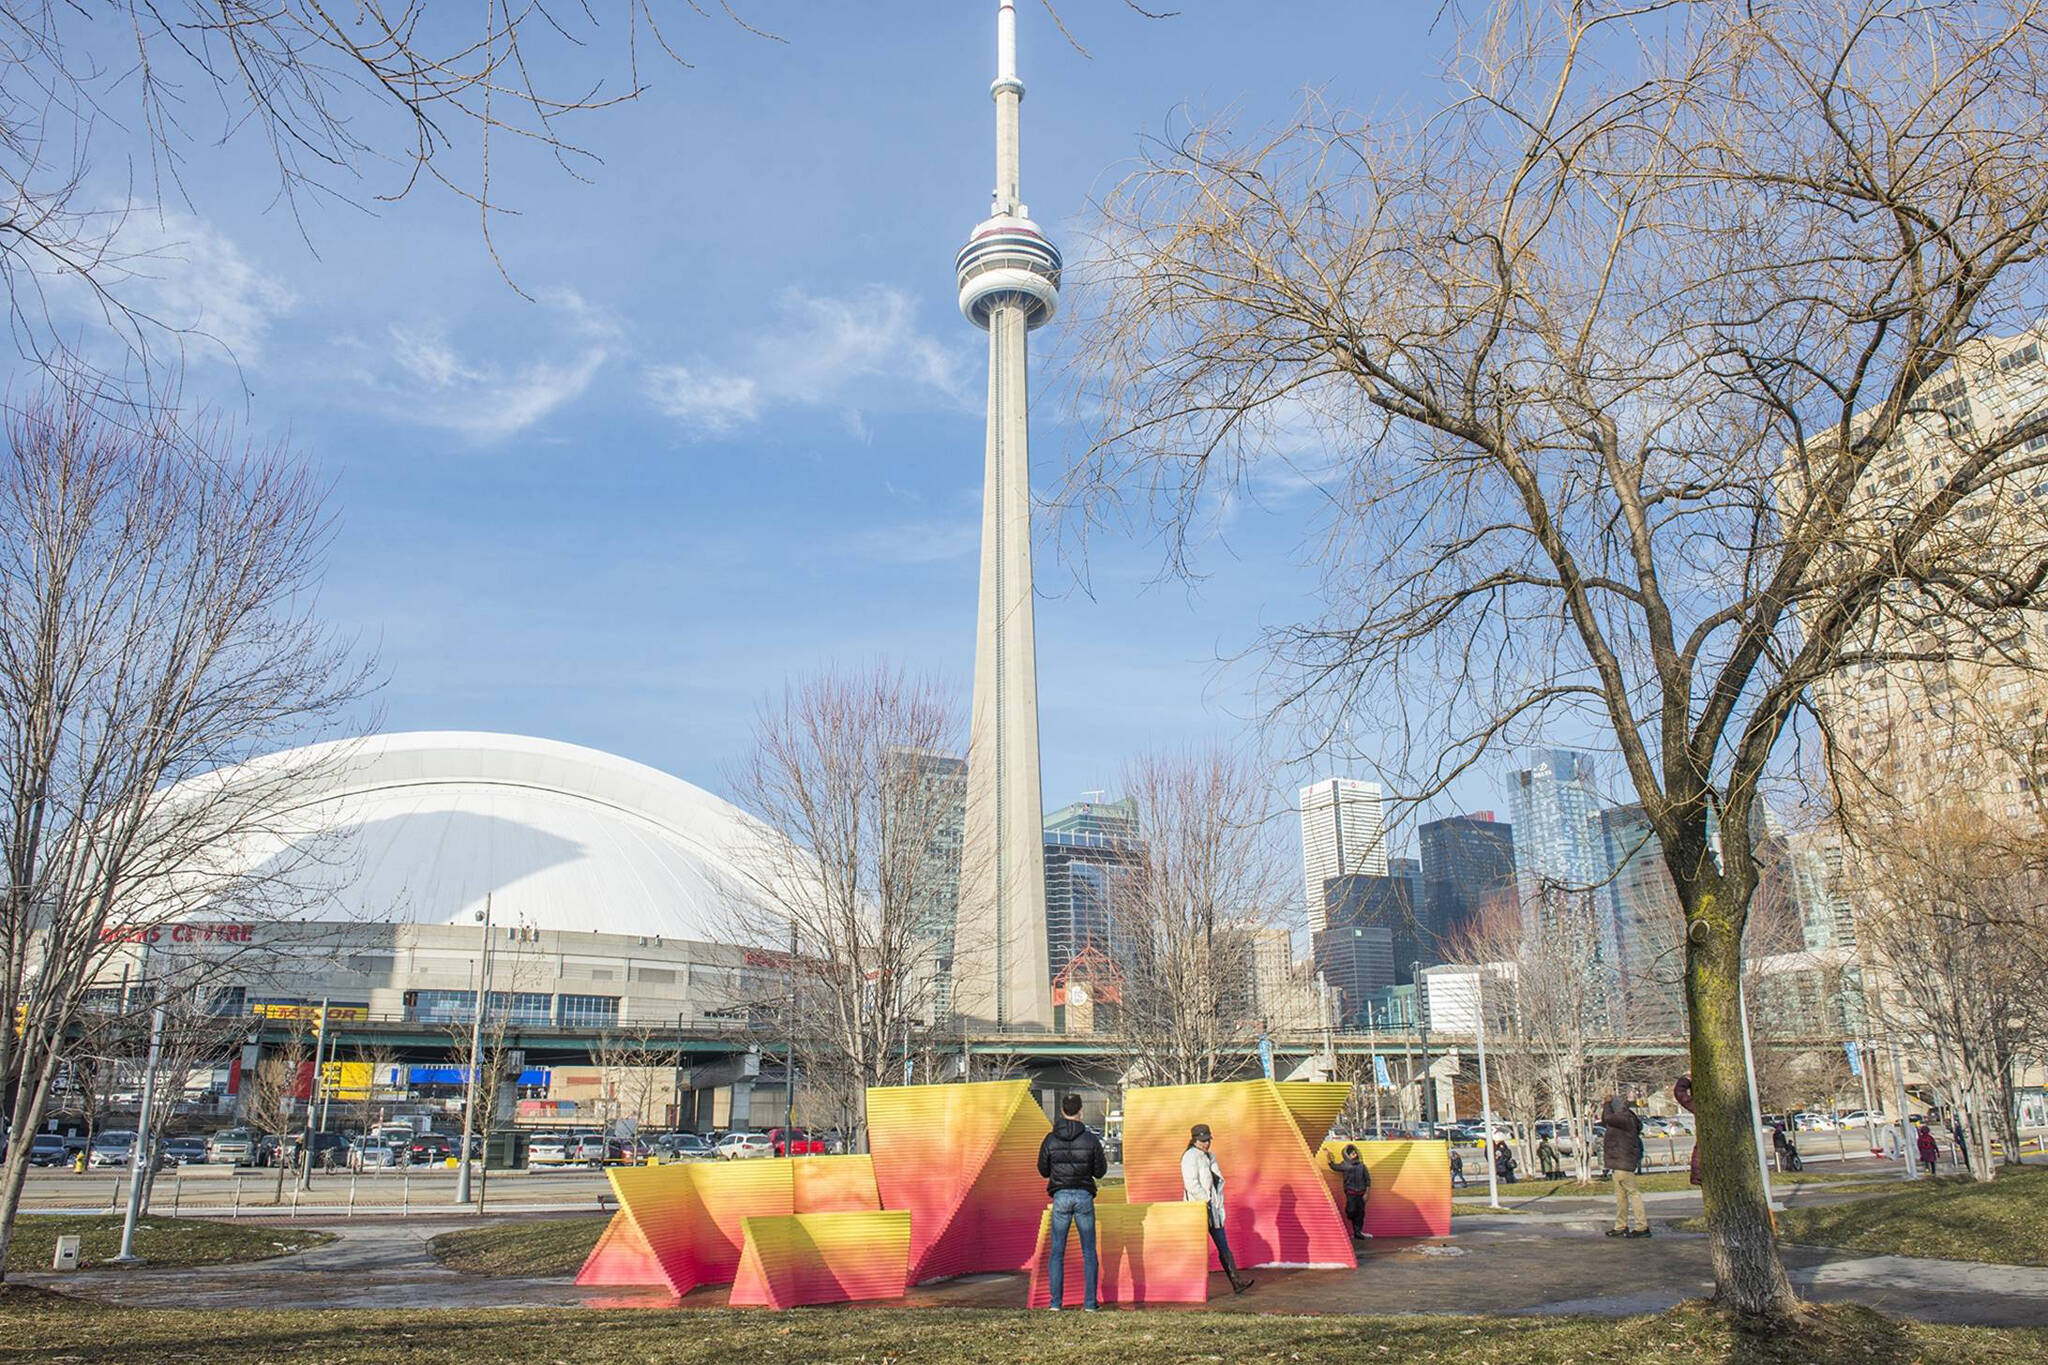 30 things to do in Toronto this weekend